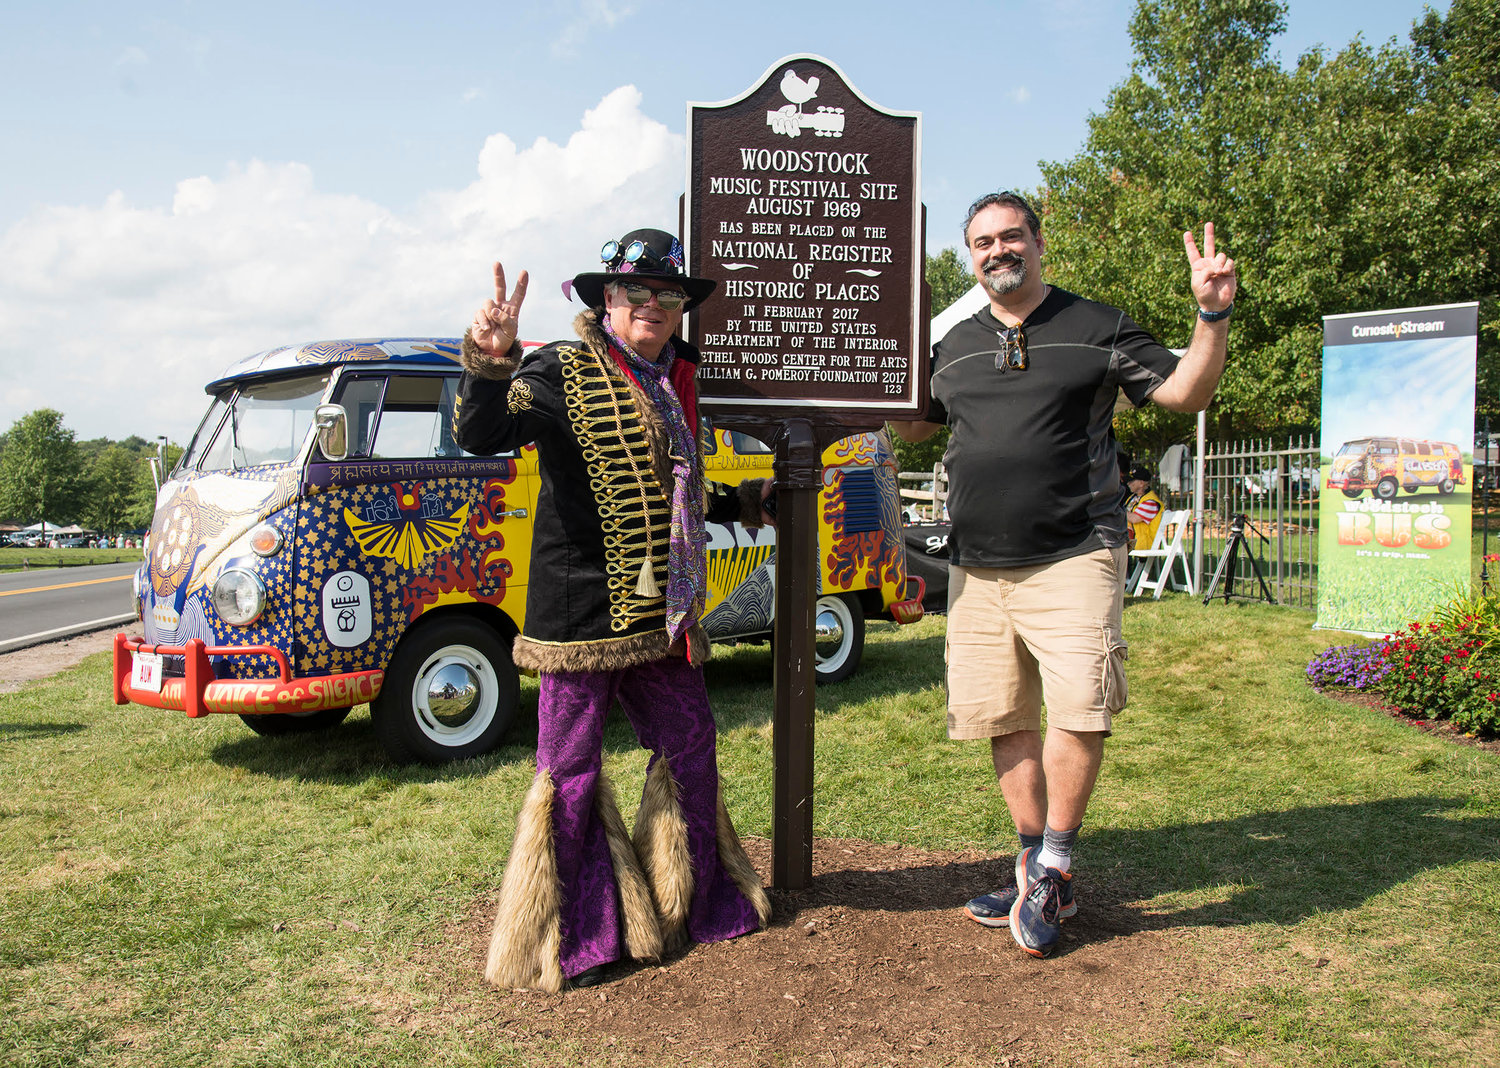 The historical marker right outside of the entrance to the Bethel Woods Concert site and Museum was a busy place for people to meet, greet, and be photographed. Pictured are two concert goers unknown to one another who decided to pose together.